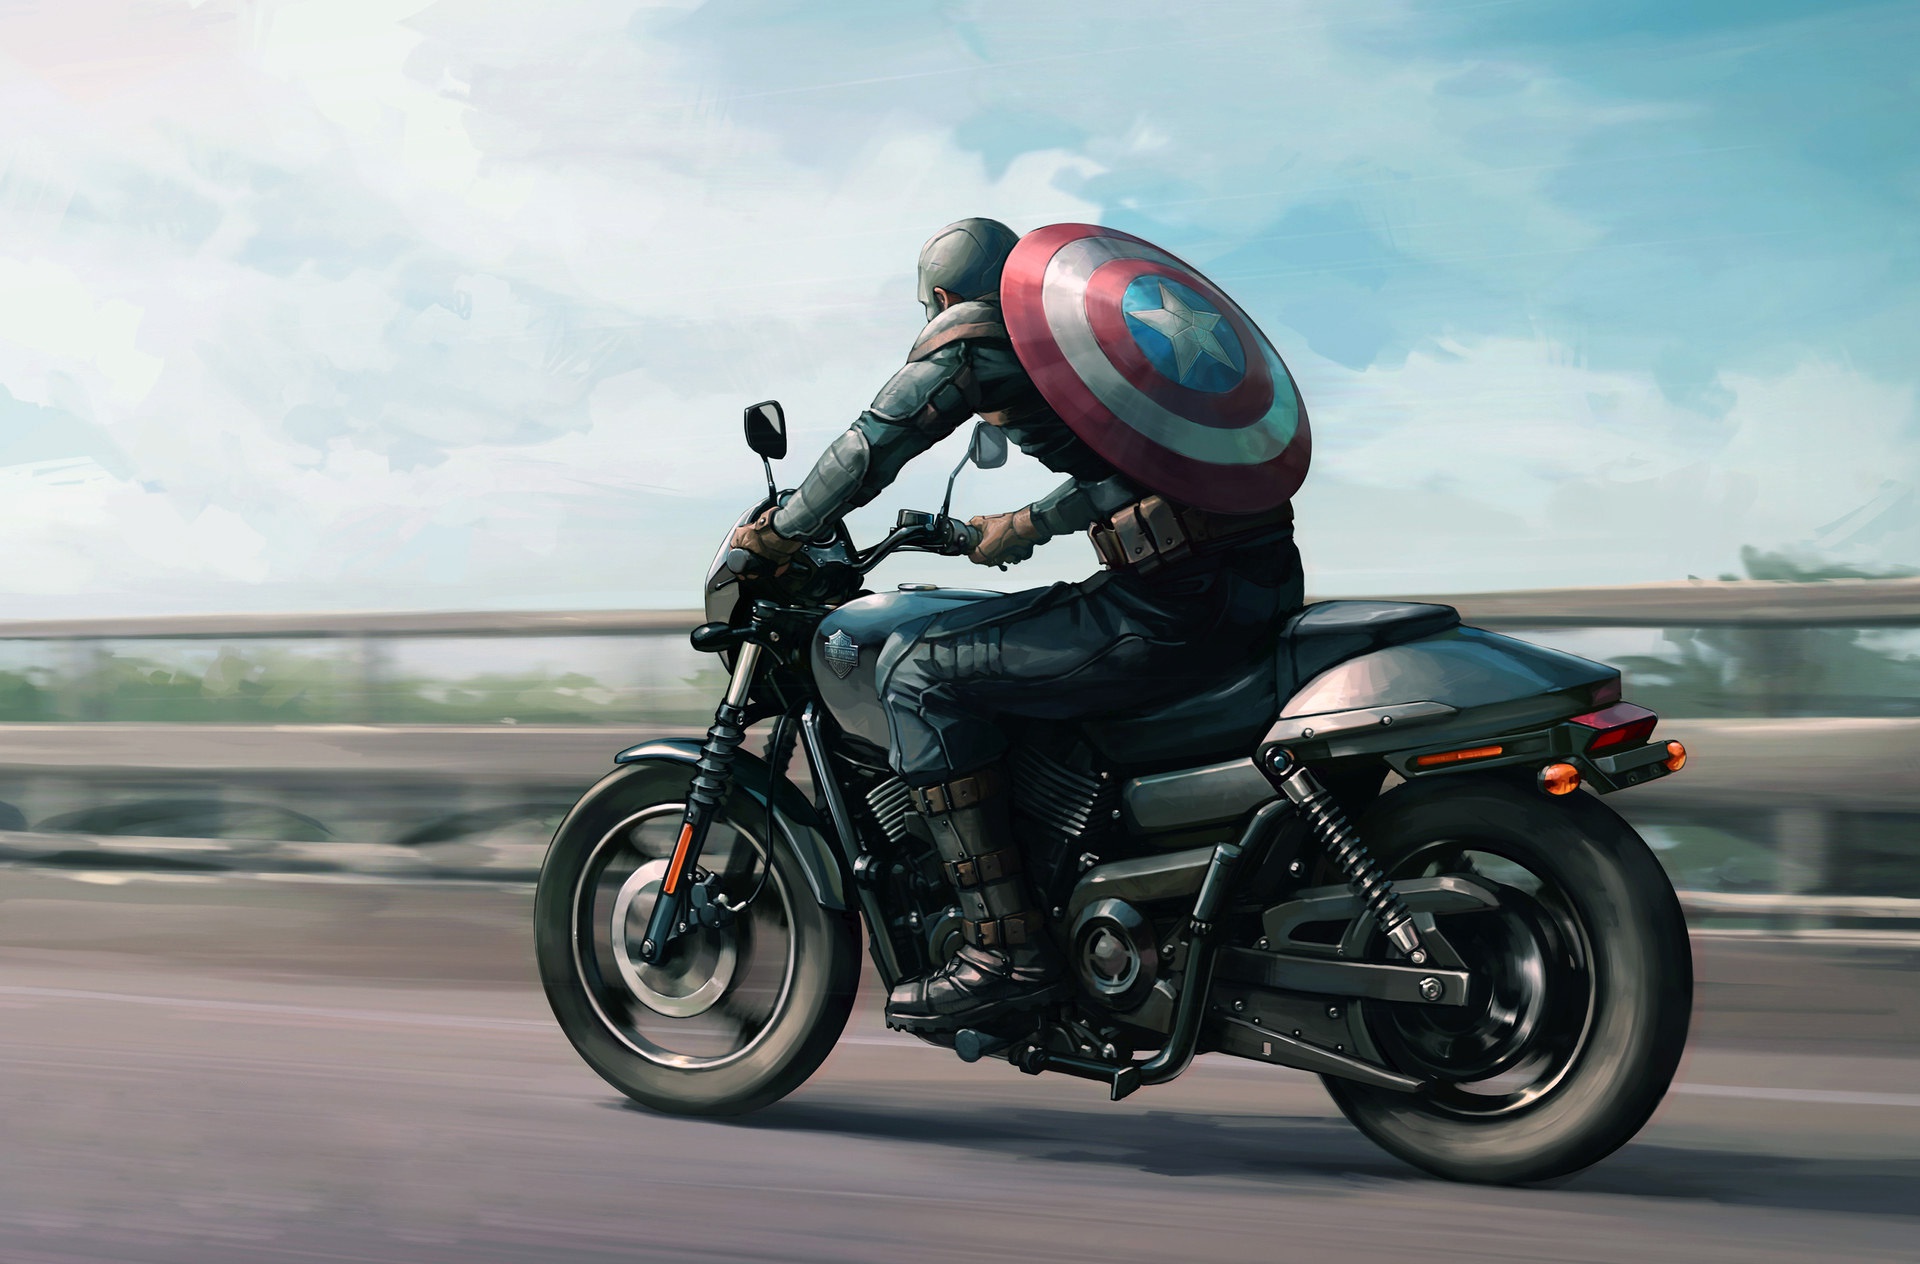 captain america, captain america: the winter soldier, harley davidson, comics, motorcycle